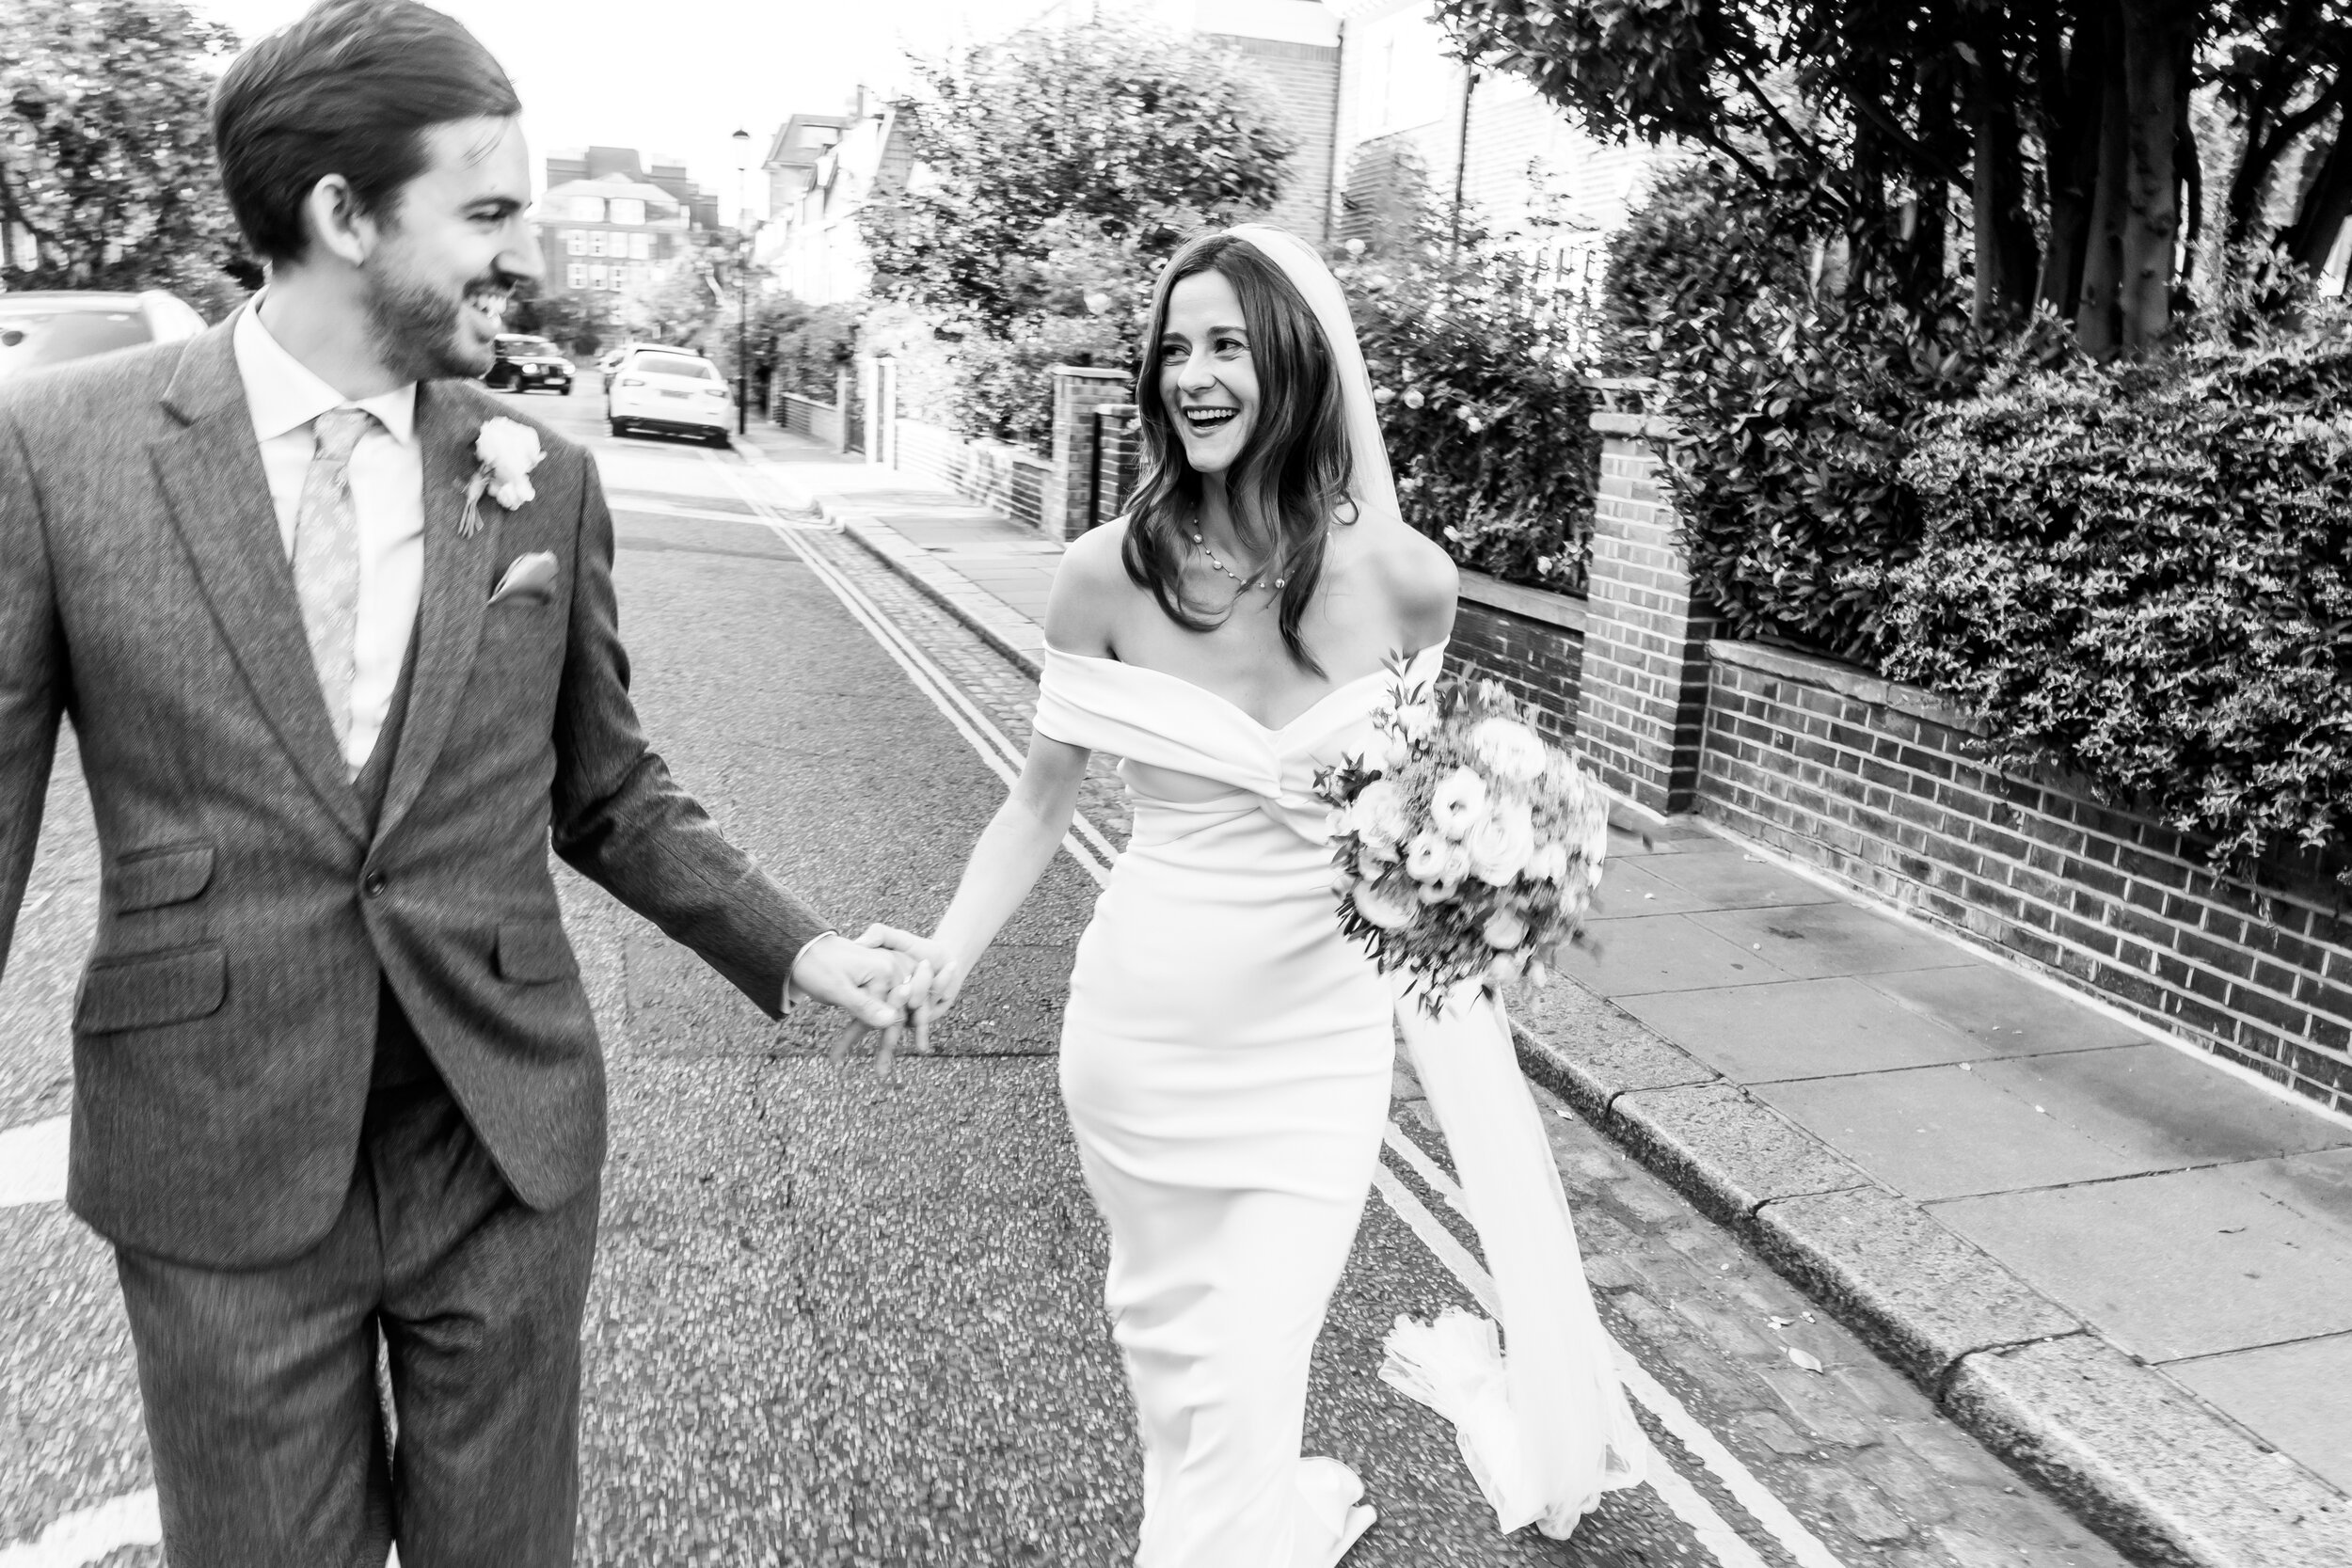 Beautiful bride Kate wore the Daffodil wedding dress by Halfpenny London